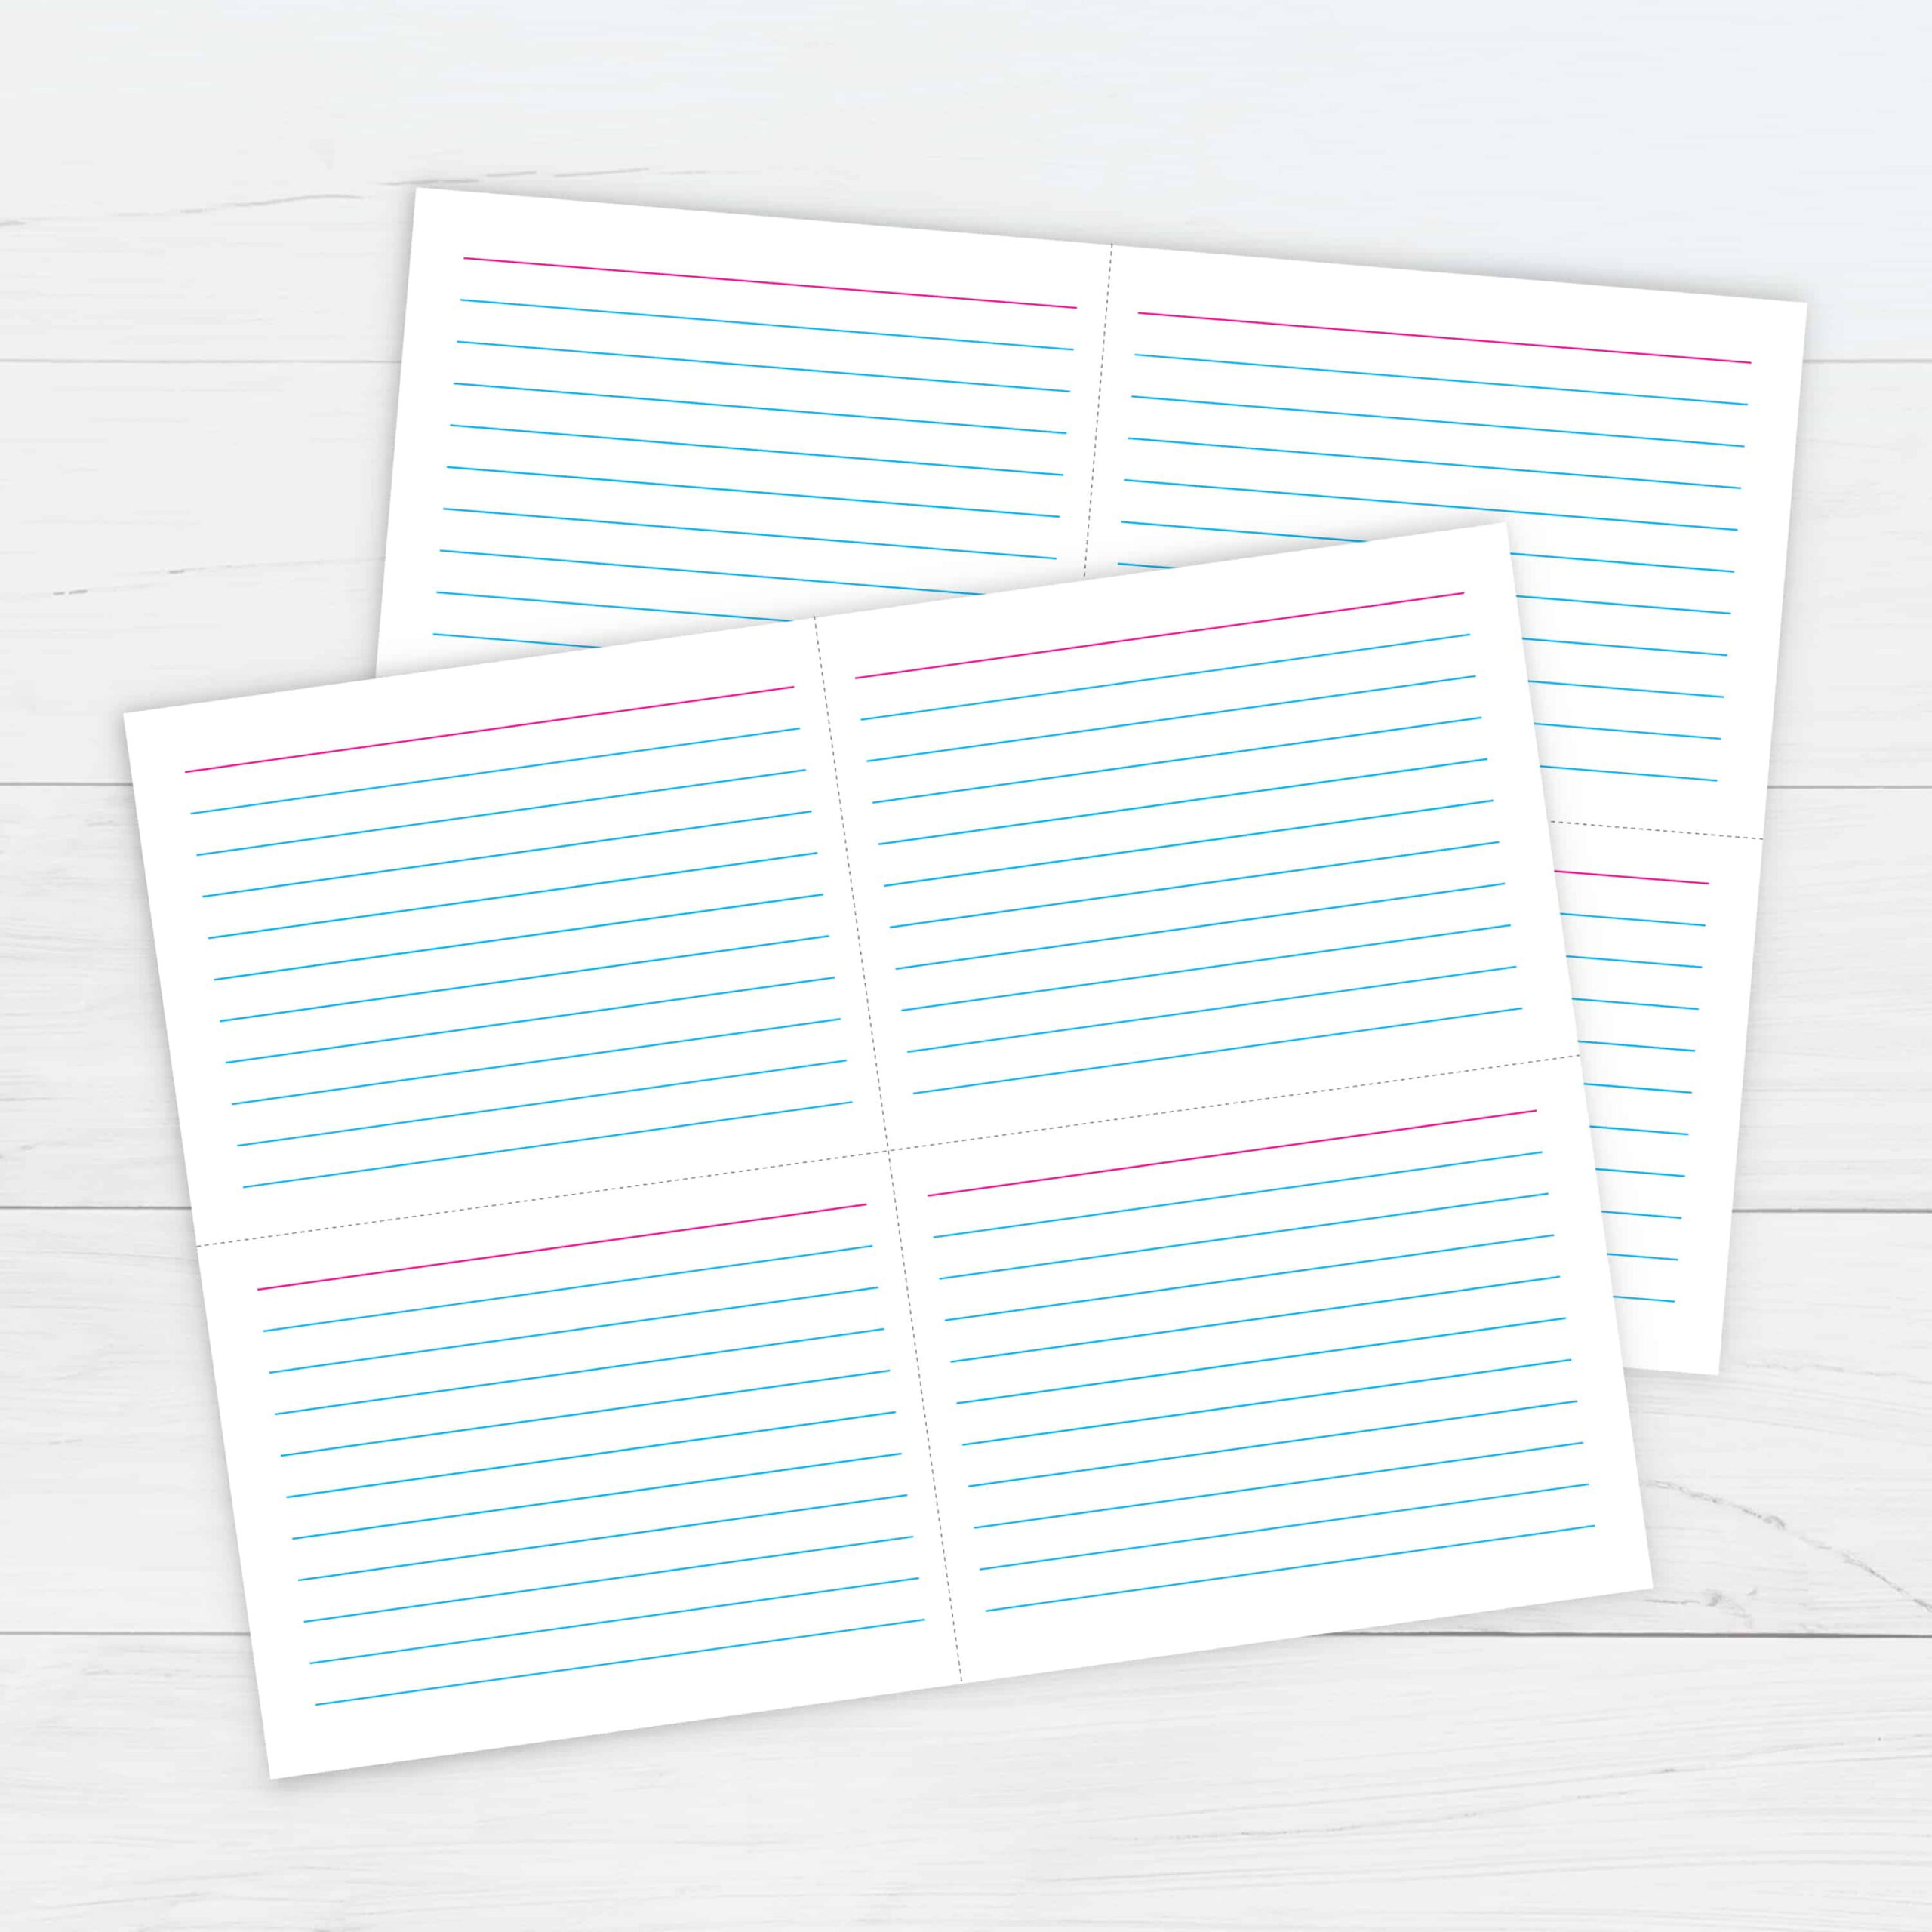 Ruled Index Cards Template - Free Printable Download within Free Printable Index Cards